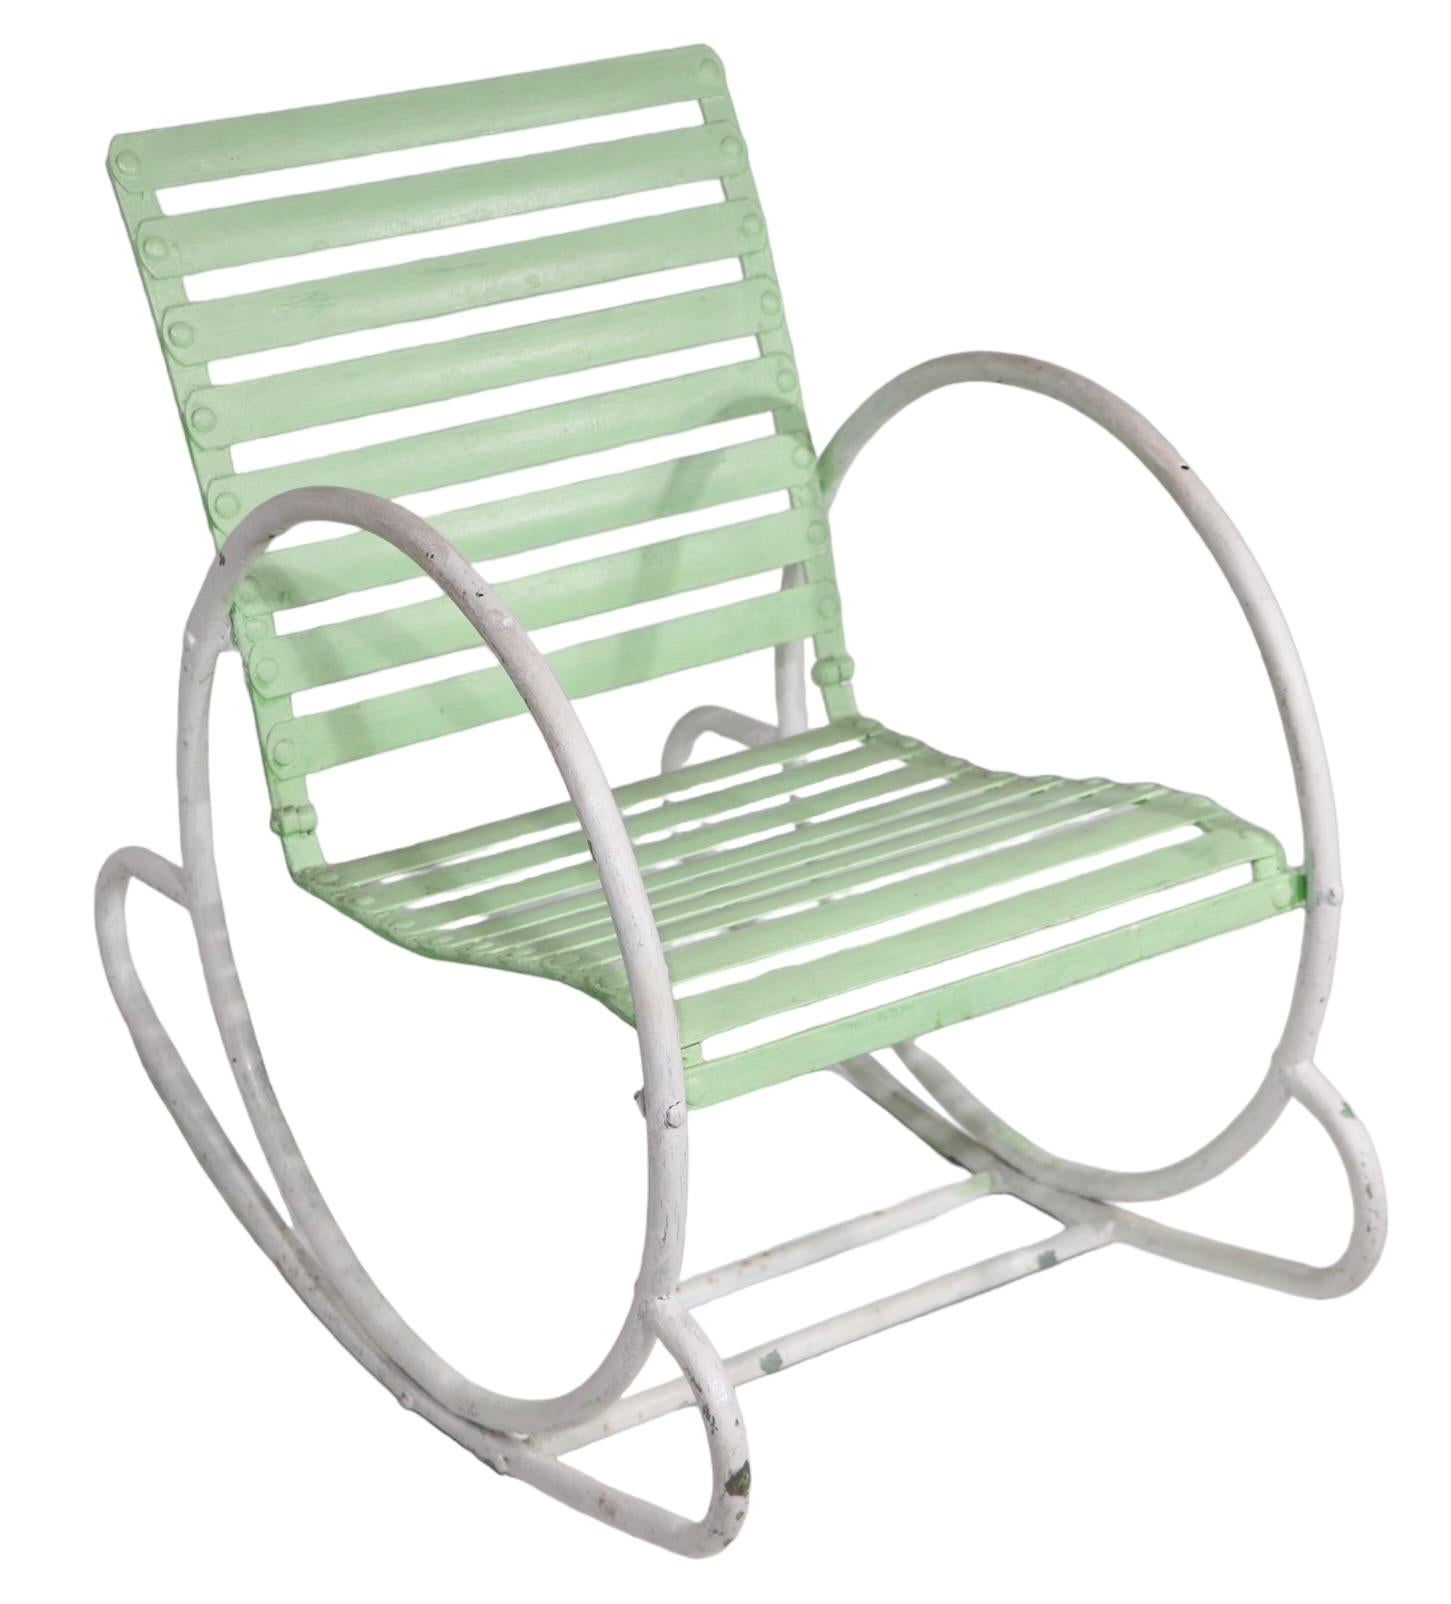 Art Deco Iron and Steel Garden Patio Poolside  Hoop Frame Rocking Chair c 1930's For Sale 6